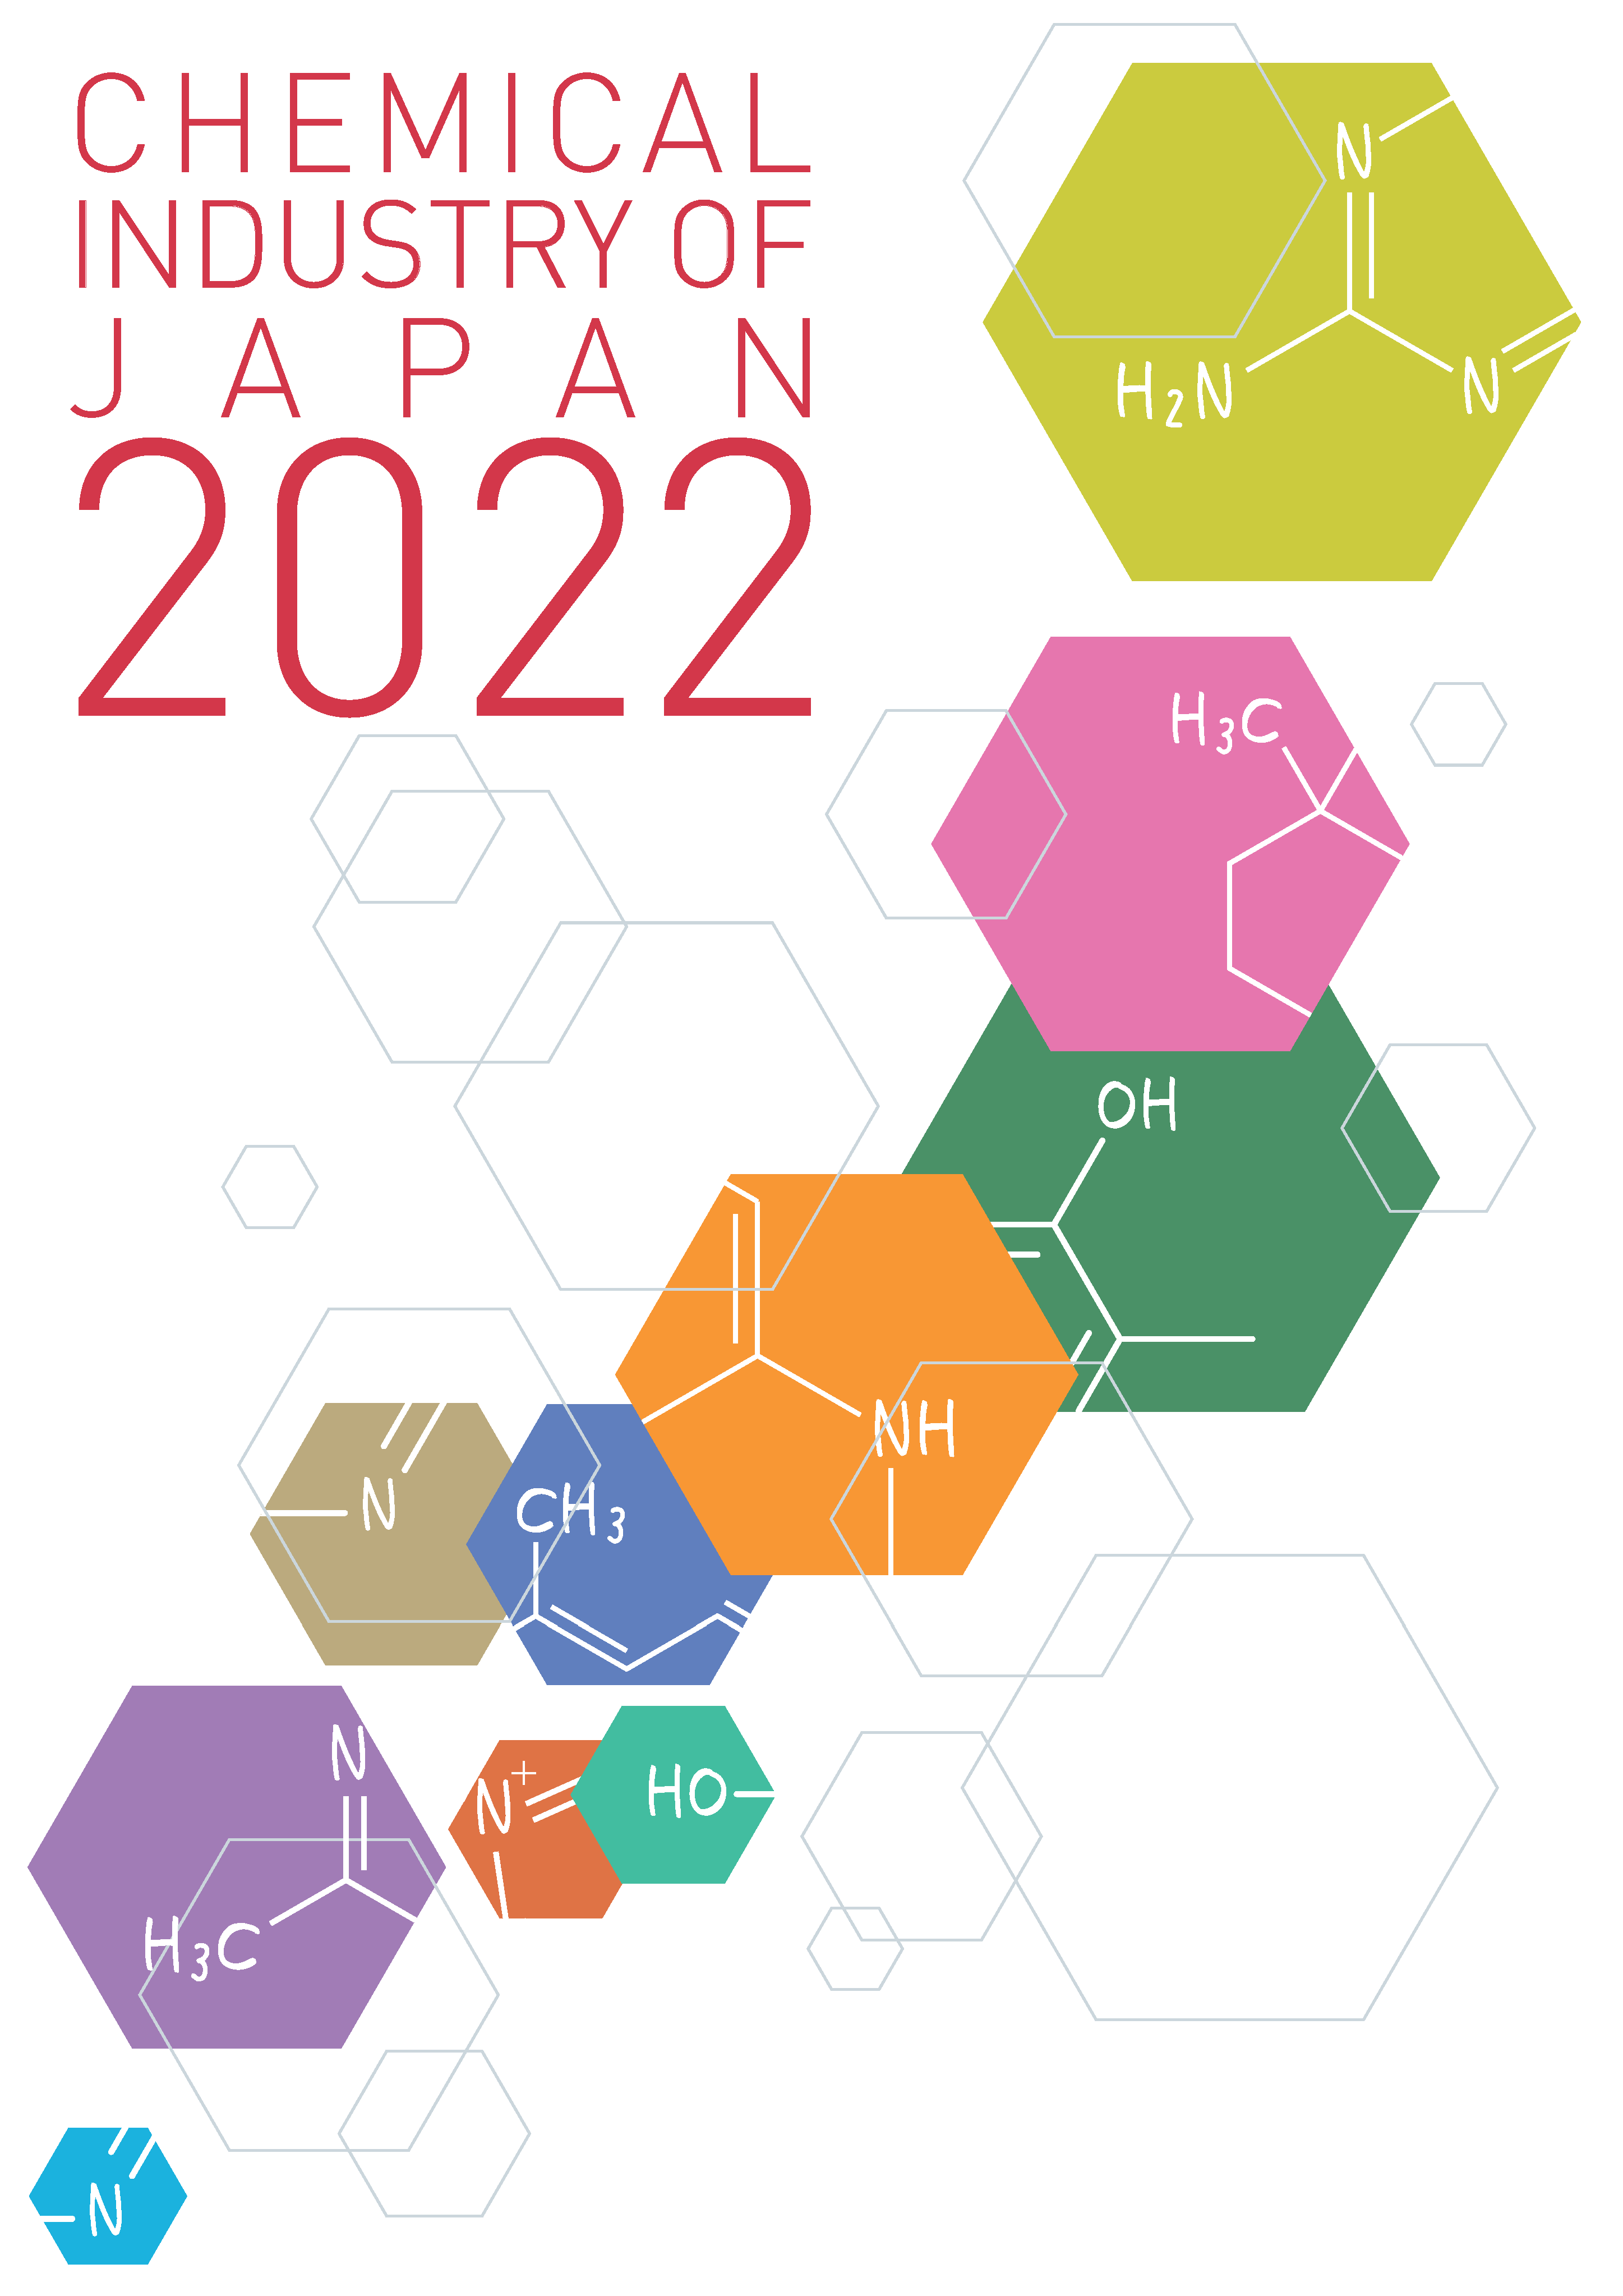 2022 CHEMICAL INDUSTRY OF JAPAN IN GRAPHS